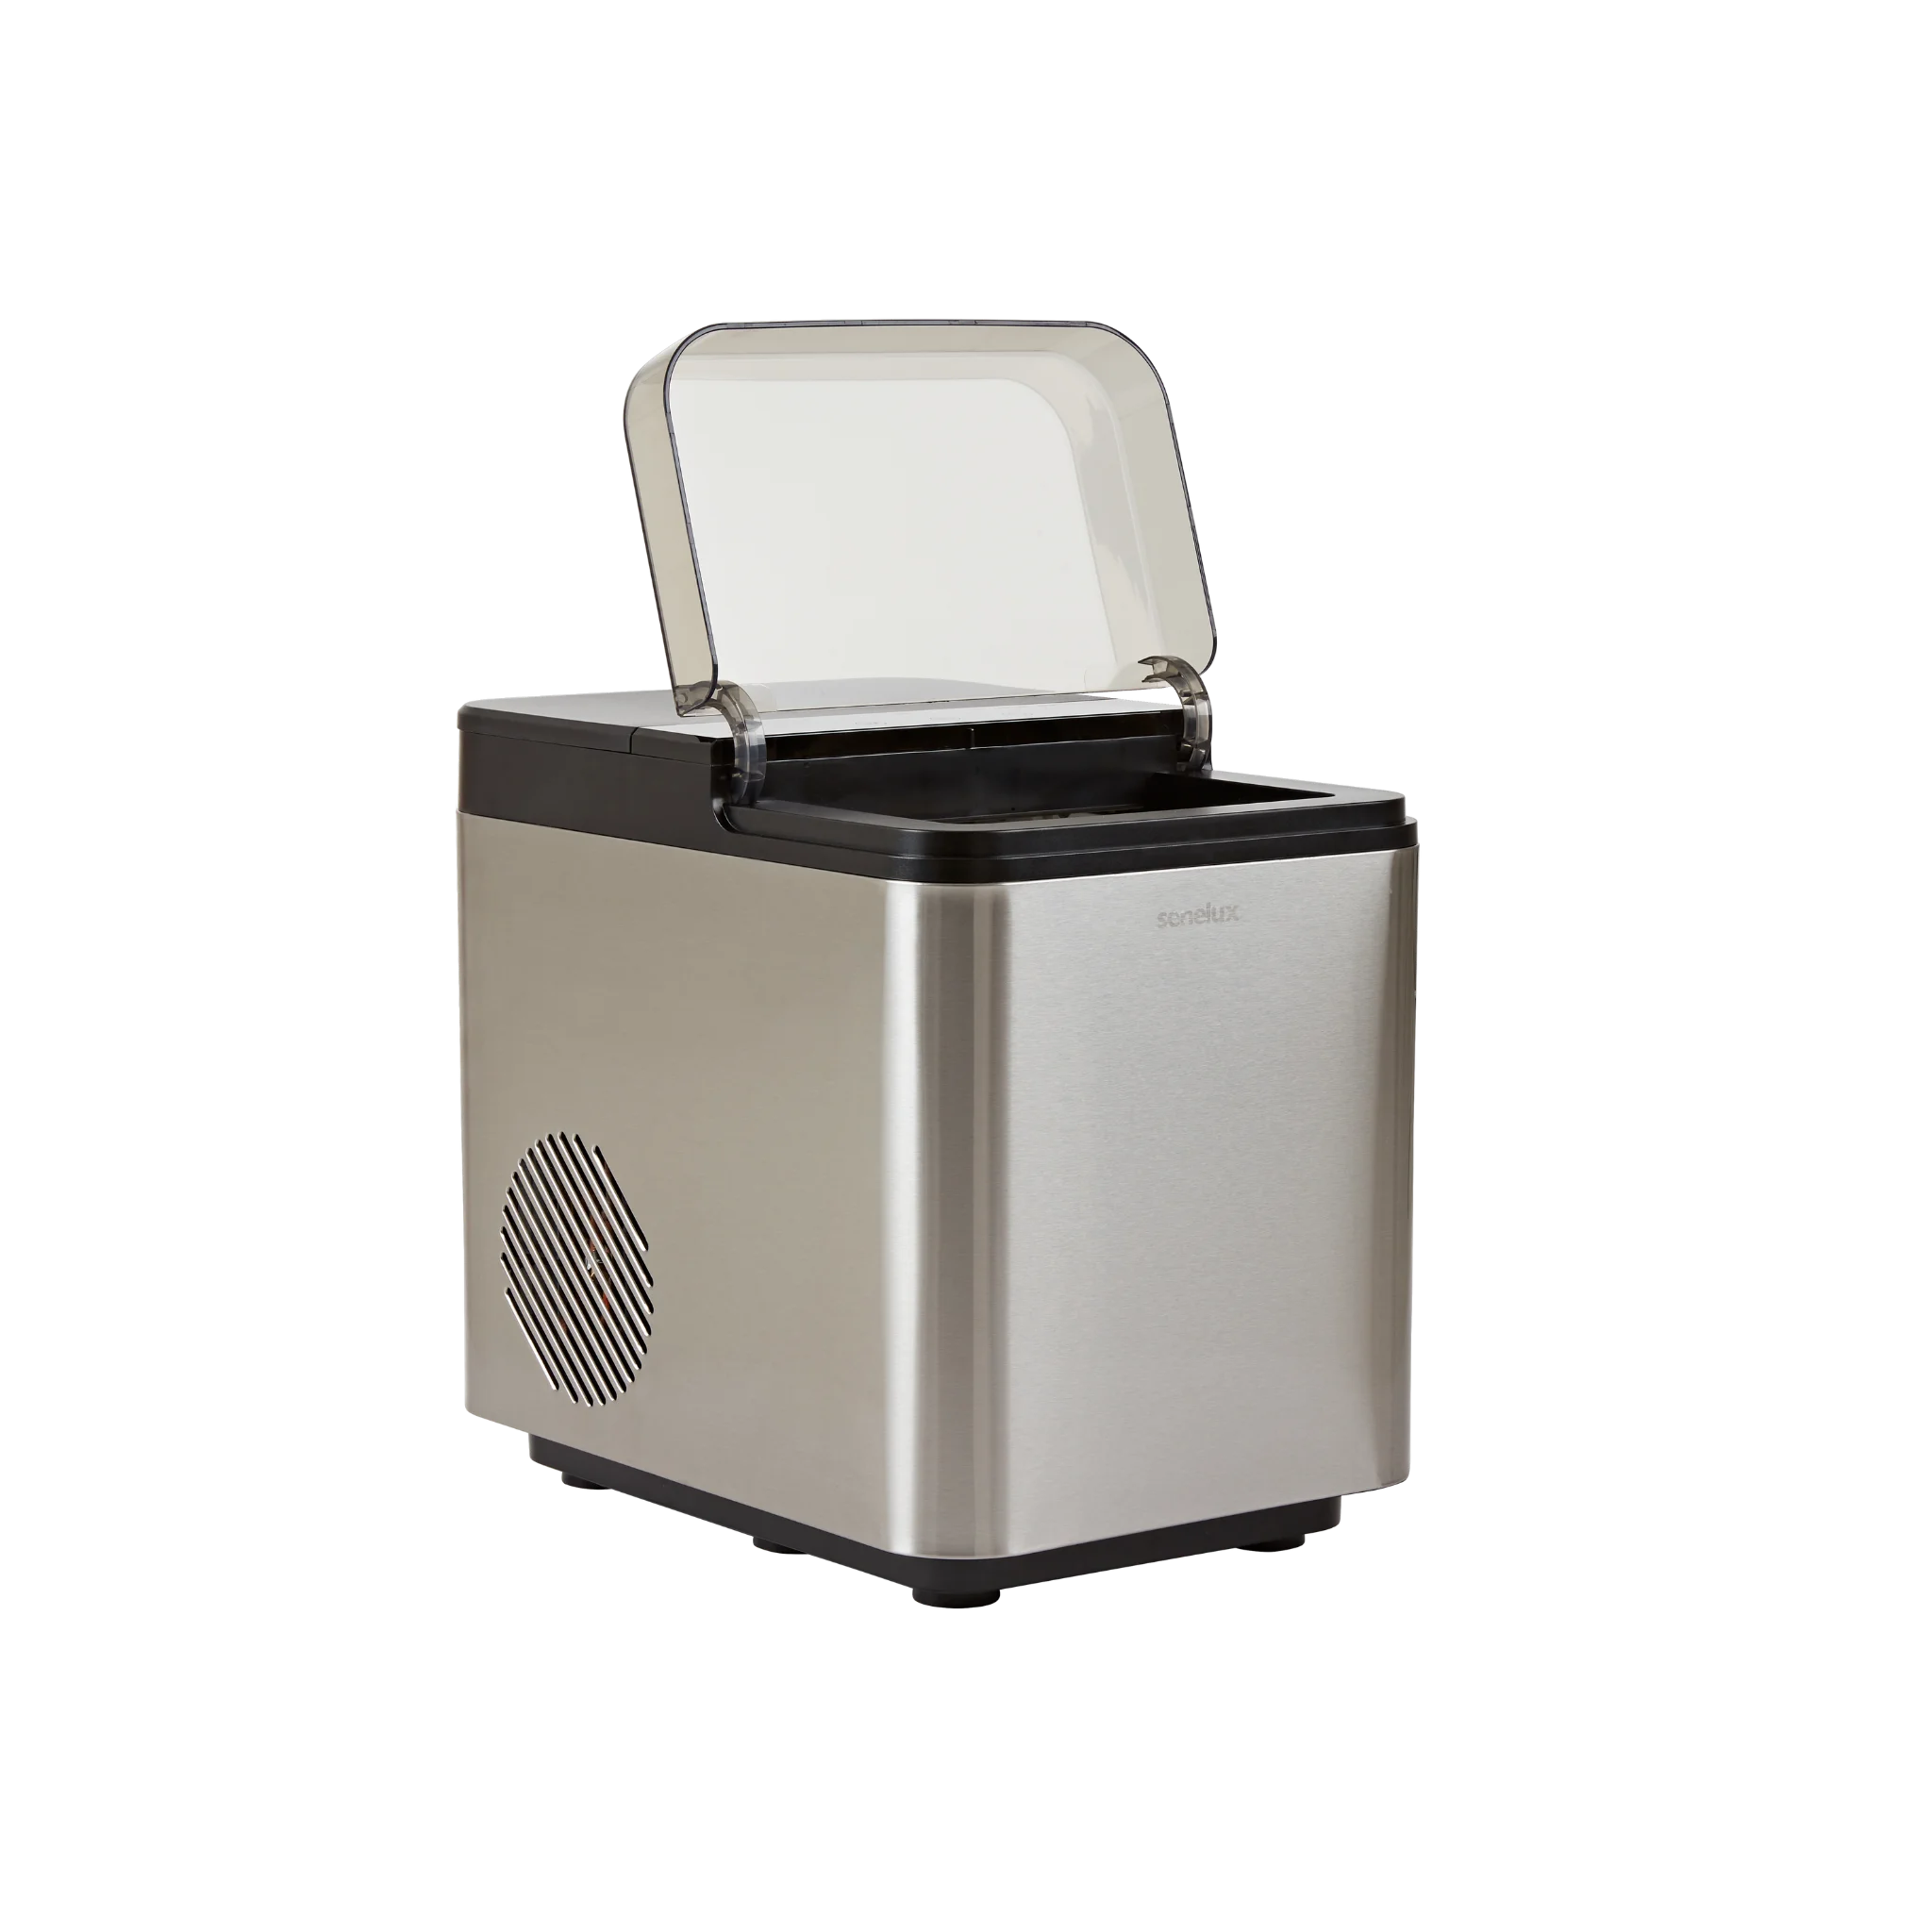 An image of a stainless, chrome steel Senelux Compact Ice Maker with a clear, tinted lid for the ice bucket.